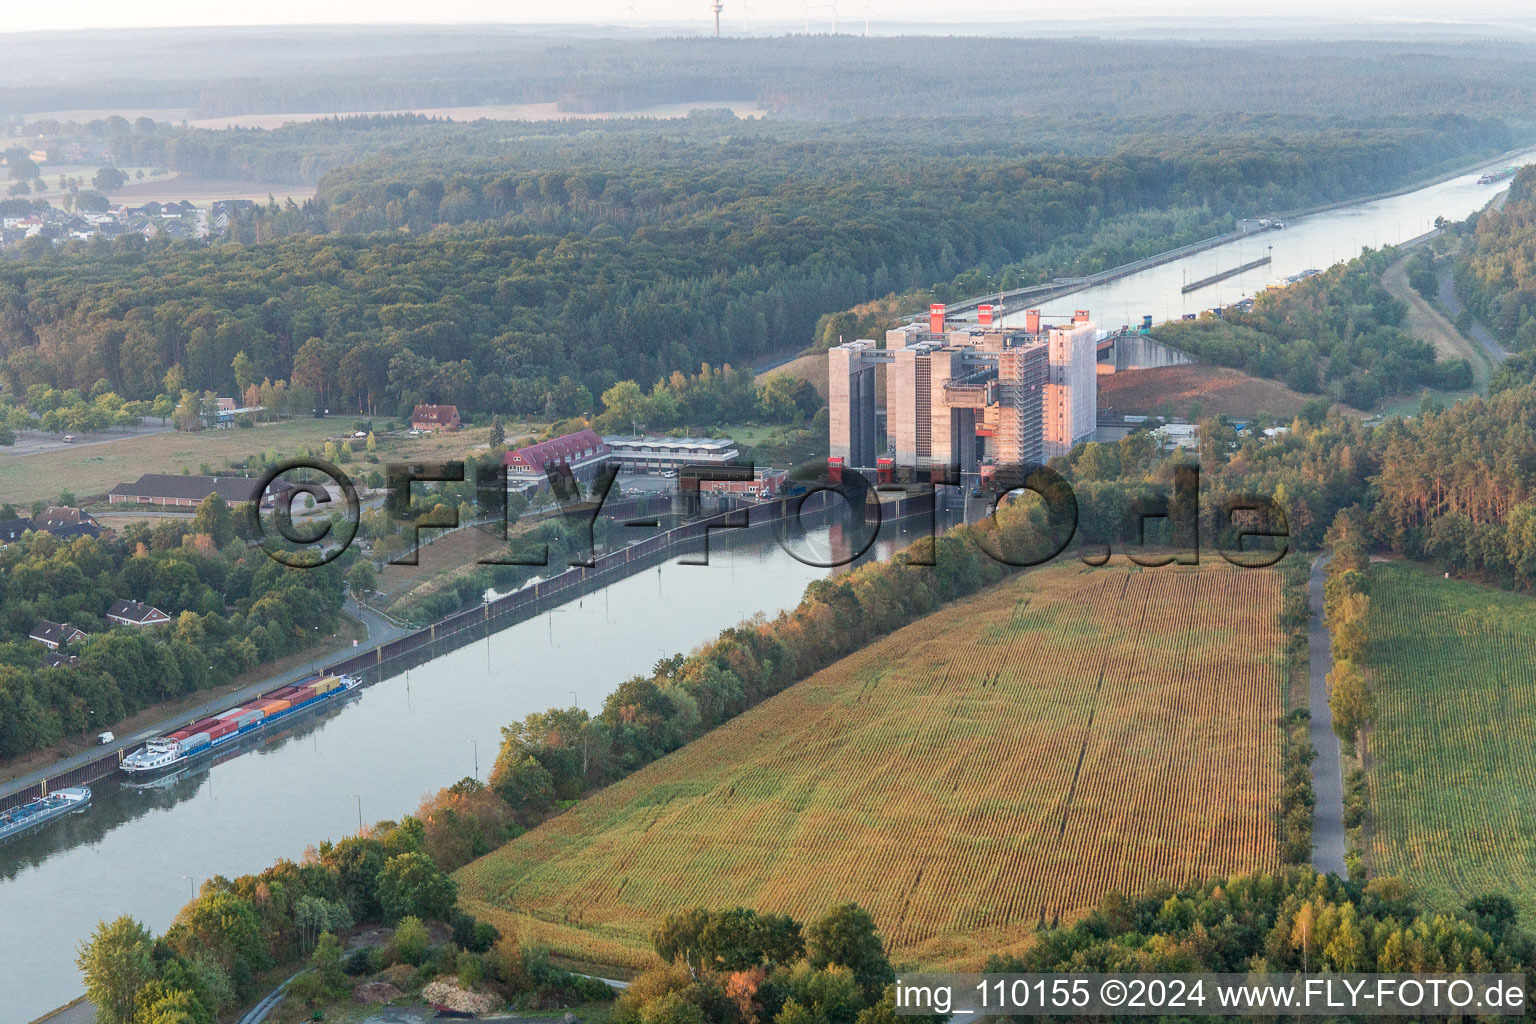 Aerial view of Boat lift and locks plants on the banks of the waterway of the Elbe side channel in Scharnebeck in the state Lower Saxony, Germany